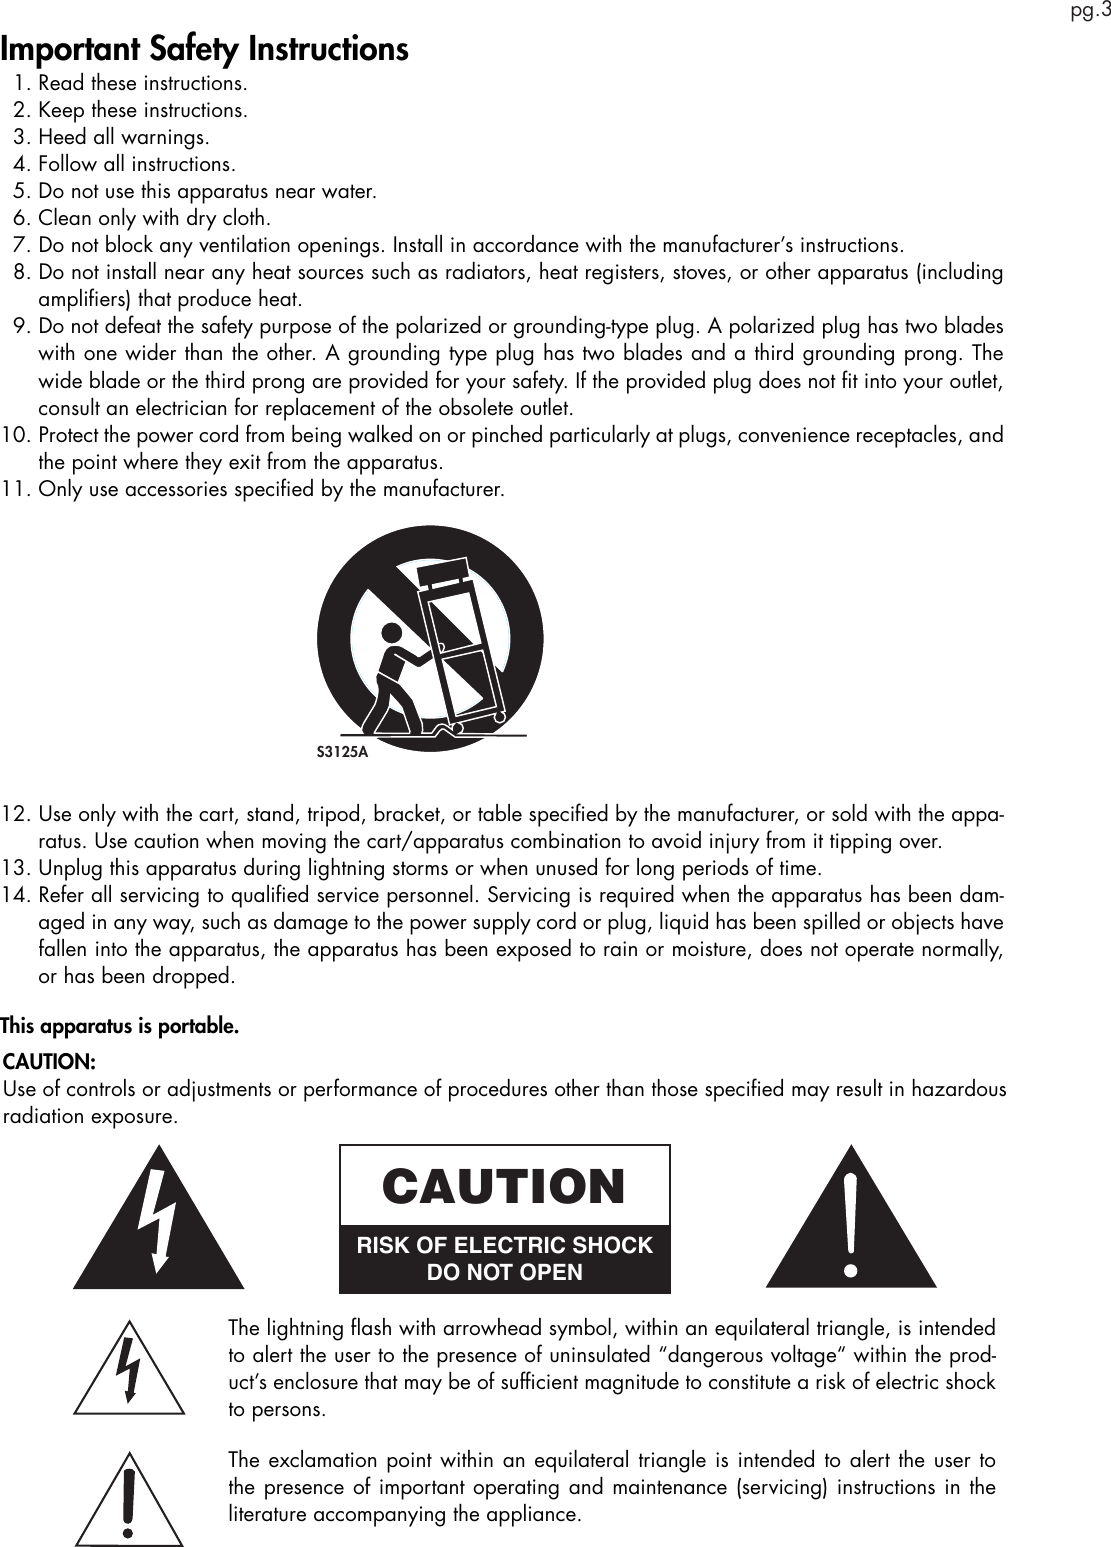 pg.3Important Safety Instructions  1. Read these instructions.  2. Keep these instructions.  3. Heed all warnings.  4. Follow all instructions.  5. Do not use this apparatus near water.  6. Clean only with dry cloth.  7.  Do not block any ventilation openings. Install in accordance with the manufacturer’s instructions.  8.  Do not install near any heat sources such as radiators, heat registers, stoves, or other apparatus (including ampliﬁers) that produce heat.  9.  Do not defeat the safety purpose of the polarized or grounding-type plug. A polarized plug has two blades with one wider than the other. A grounding type plug has two blades and a third grounding prong. The wide blade or the third prong are provided for your safety. If the provided plug does not ﬁt into your outlet, consult an electrician for replacement of the obsolete outlet.10.  Protect the power cord from being walked on or pinched particularly at plugs, convenience receptacles, and the point where they exit from the apparatus.11. Only use accessories speciﬁed by the manufacturer.12.  Use only with the cart, stand, tripod, bracket, or table speciﬁed by the manufacturer, or sold with the appa-ratus. Use caution when moving the cart/apparatus combination to avoid injury from it tipping over.13. Unplug this apparatus during lightning storms or when unused for long periods of time.14.  Refer all servicing to qualiﬁed service personnel. Servicing is required when the apparatus has been dam-aged in any way, such as damage to the power supply cord or plug, liquid has been spilled or objects have fallen into the apparatus, the apparatus has been exposed to rain or moisture, does not operate normally, or has been dropped.This apparatus is portable. S3125AThe lightning ﬂash with arrowhead symbol, within an equilateral triangle, is intended to alert the user to the presence of uninsulated “dangerous voltage“ within the prod-uct’s enclosure that may be of sufﬁcient magnitude to constitute a risk of electric shock to persons.The exclamation point within an equilateral triangle is intended to alert the user to the presence of important operating and maintenance (servicing) instructions in the literature accompanying the appliance.CAUTIONRISK OF ELECTRIC SHOCKDO NOT OPENCAUTION:Use of controls or adjustments or performance of procedures other than those speciﬁed may result in hazardous radiation exposure.